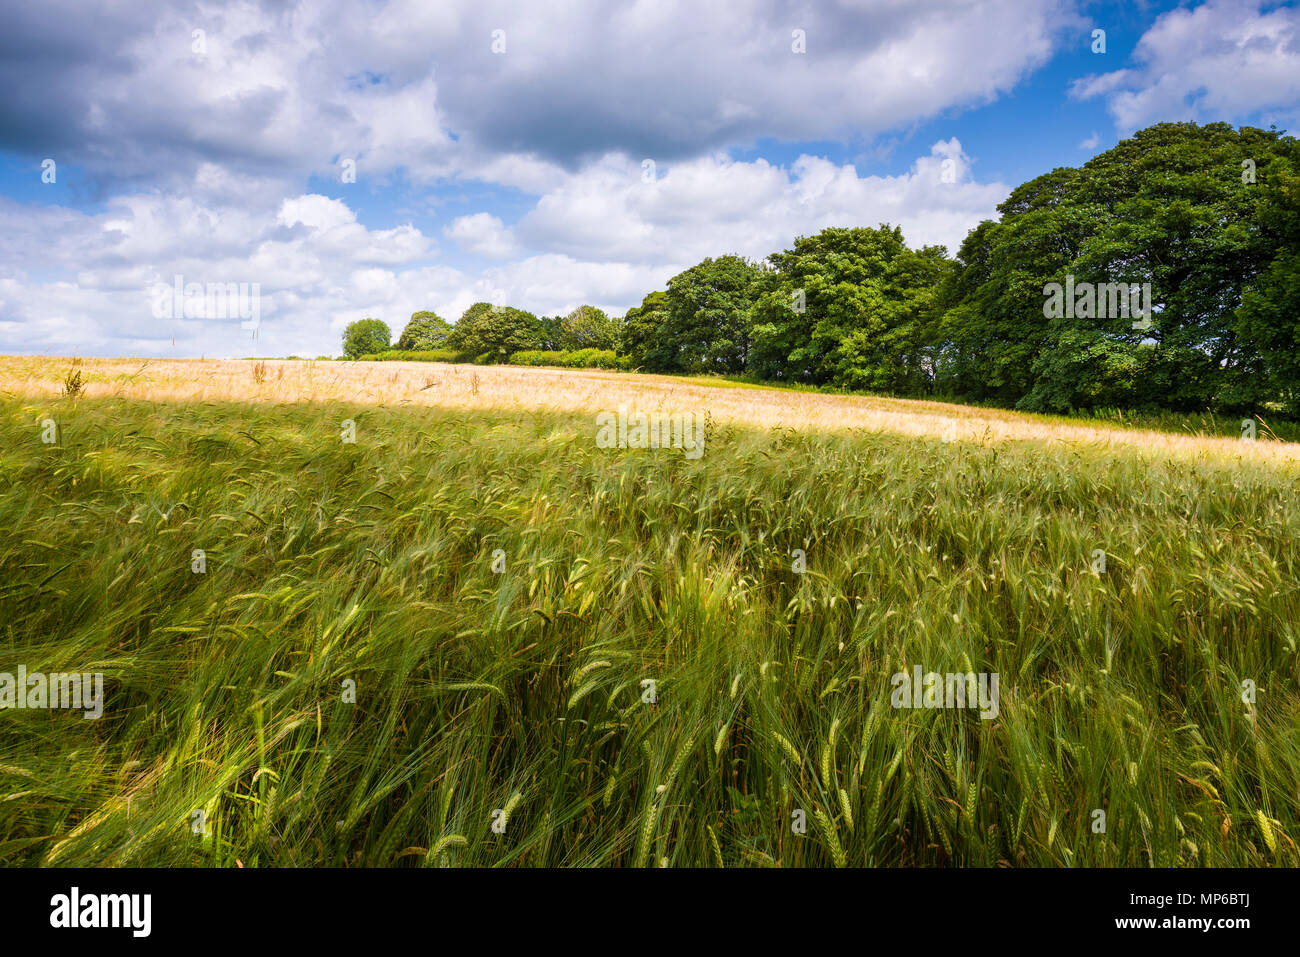 Barley (Hordeum vulgare) growing in a field on the Mendip Hills near Priddy, Somerset, England. Stock Photo